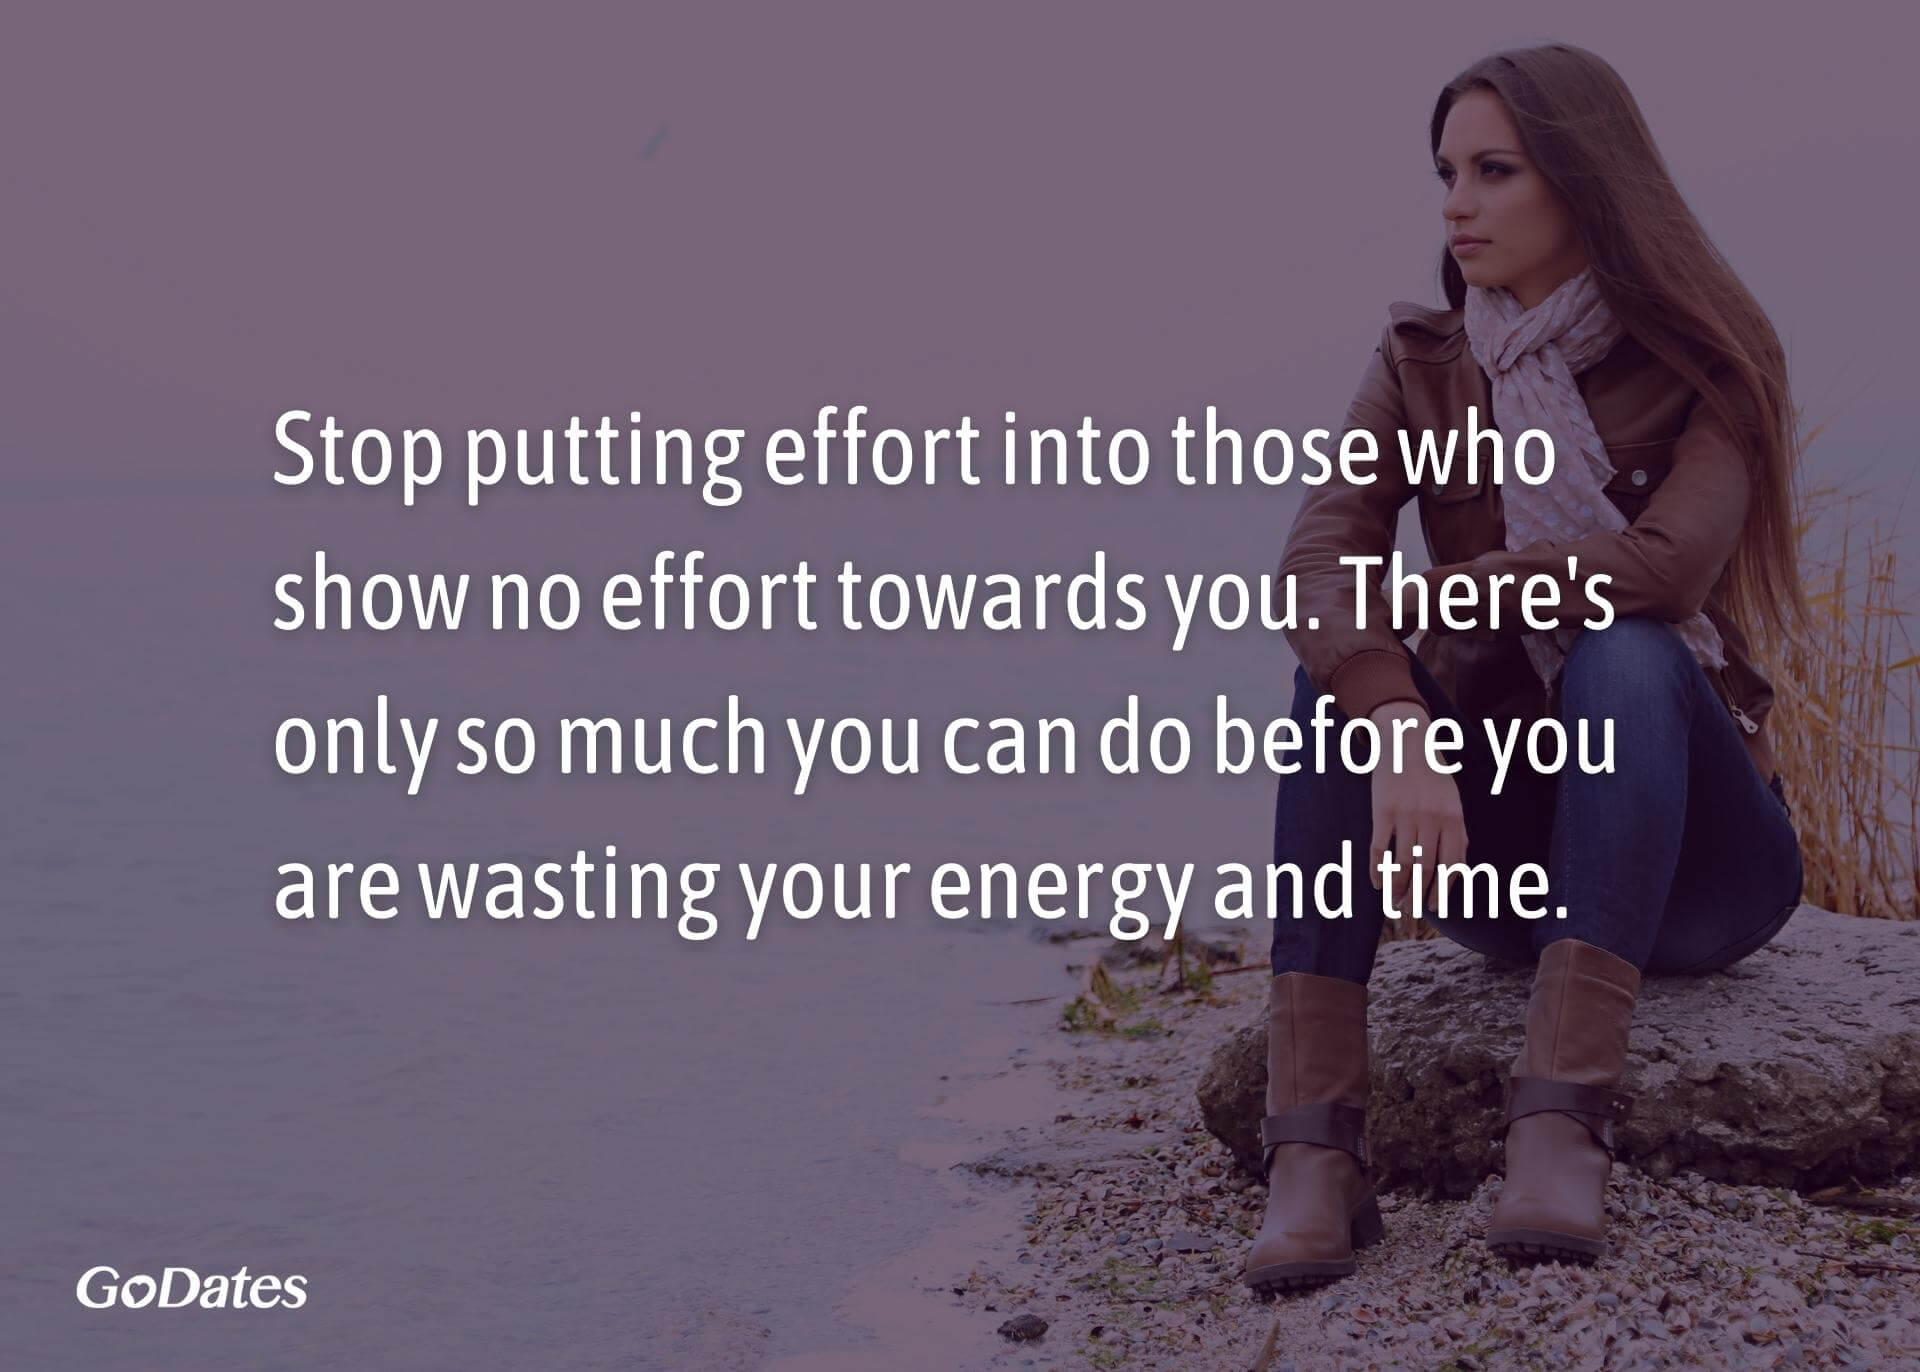 Stop putting effort into those who show no effort towards you quote